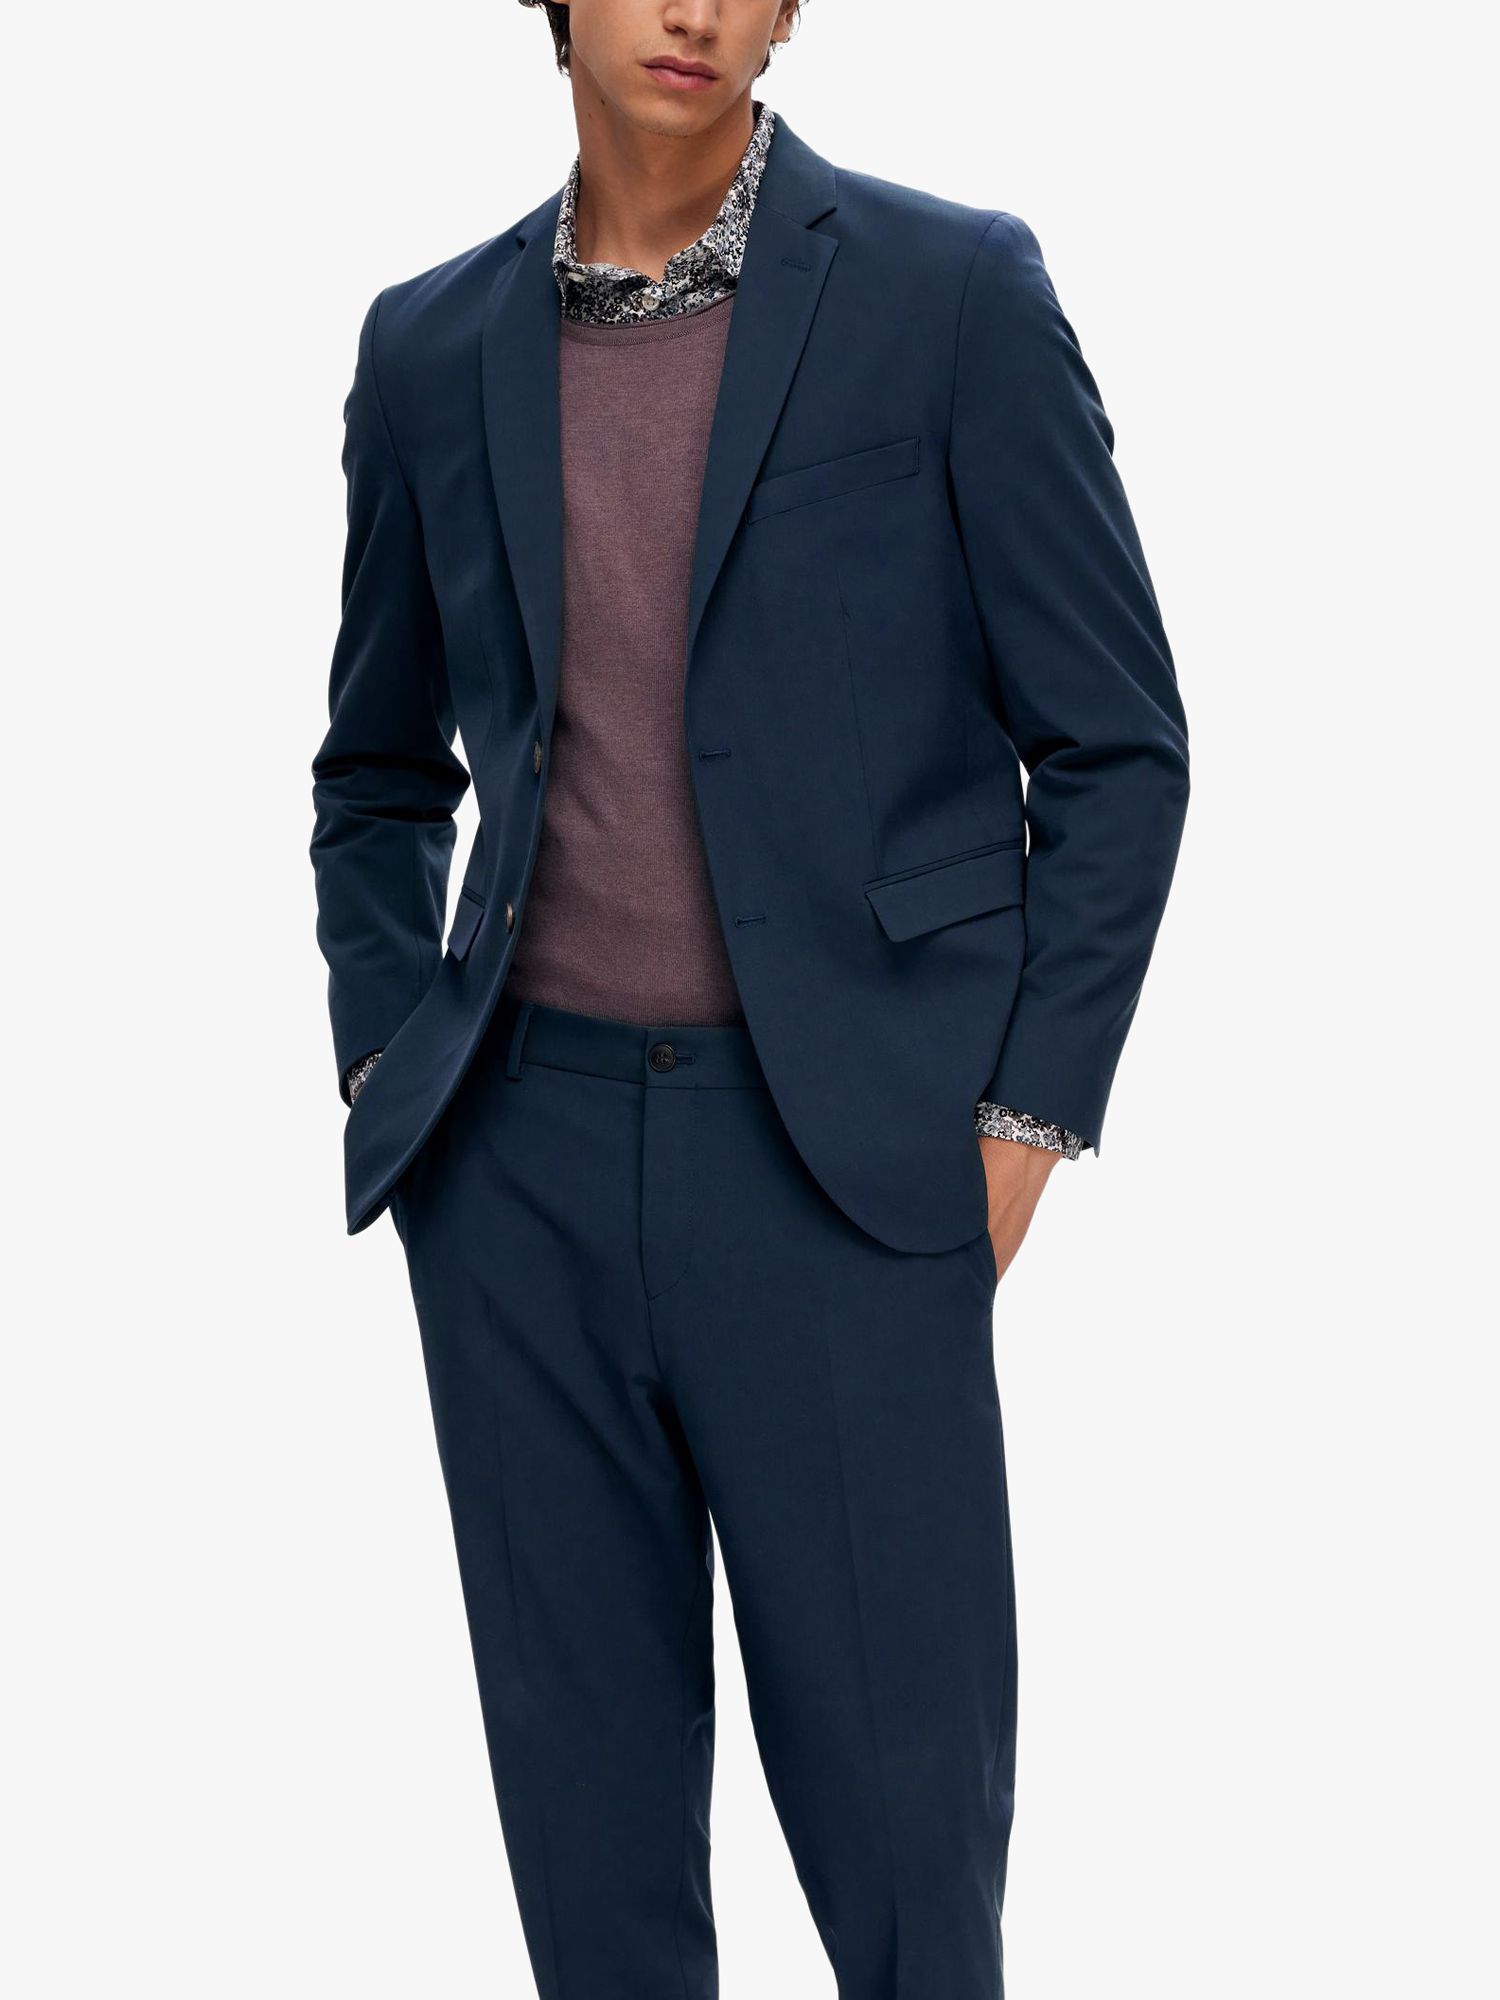 SELECTED HOMME Liam Suit Blazer, Navy at John Lewis & Partners